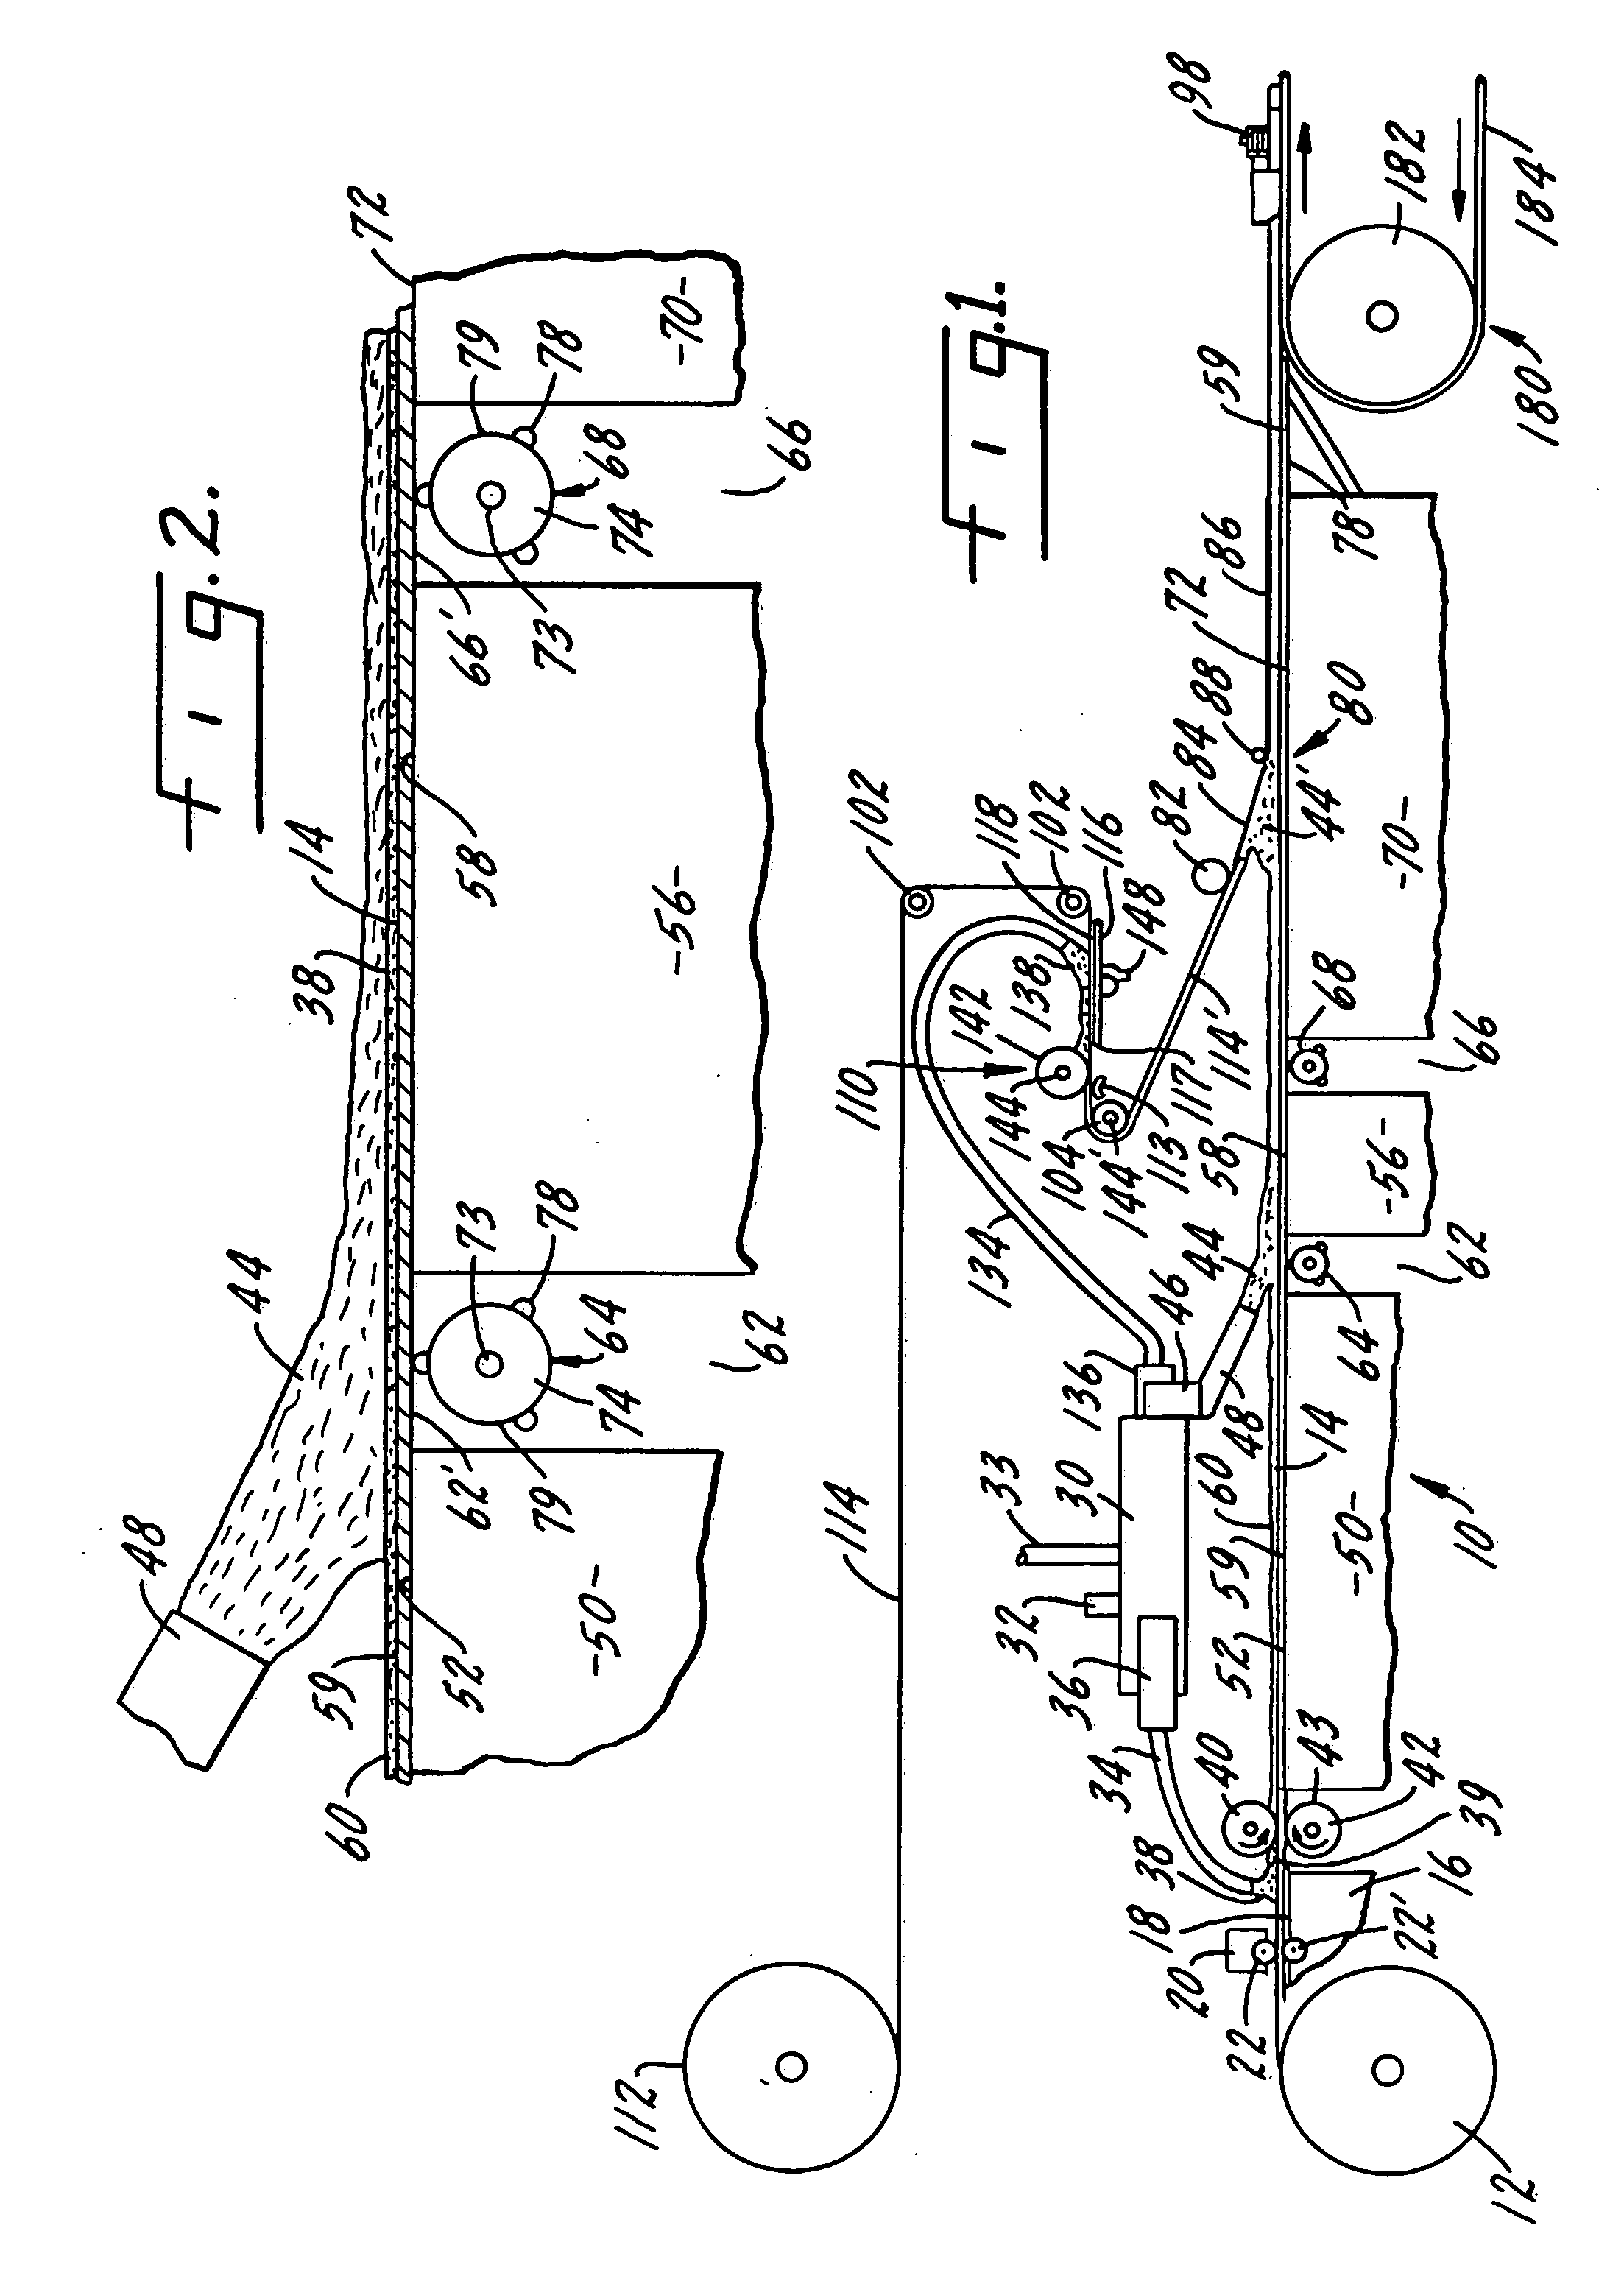 Exterior sheathing weather barrier construction and method of manufacture